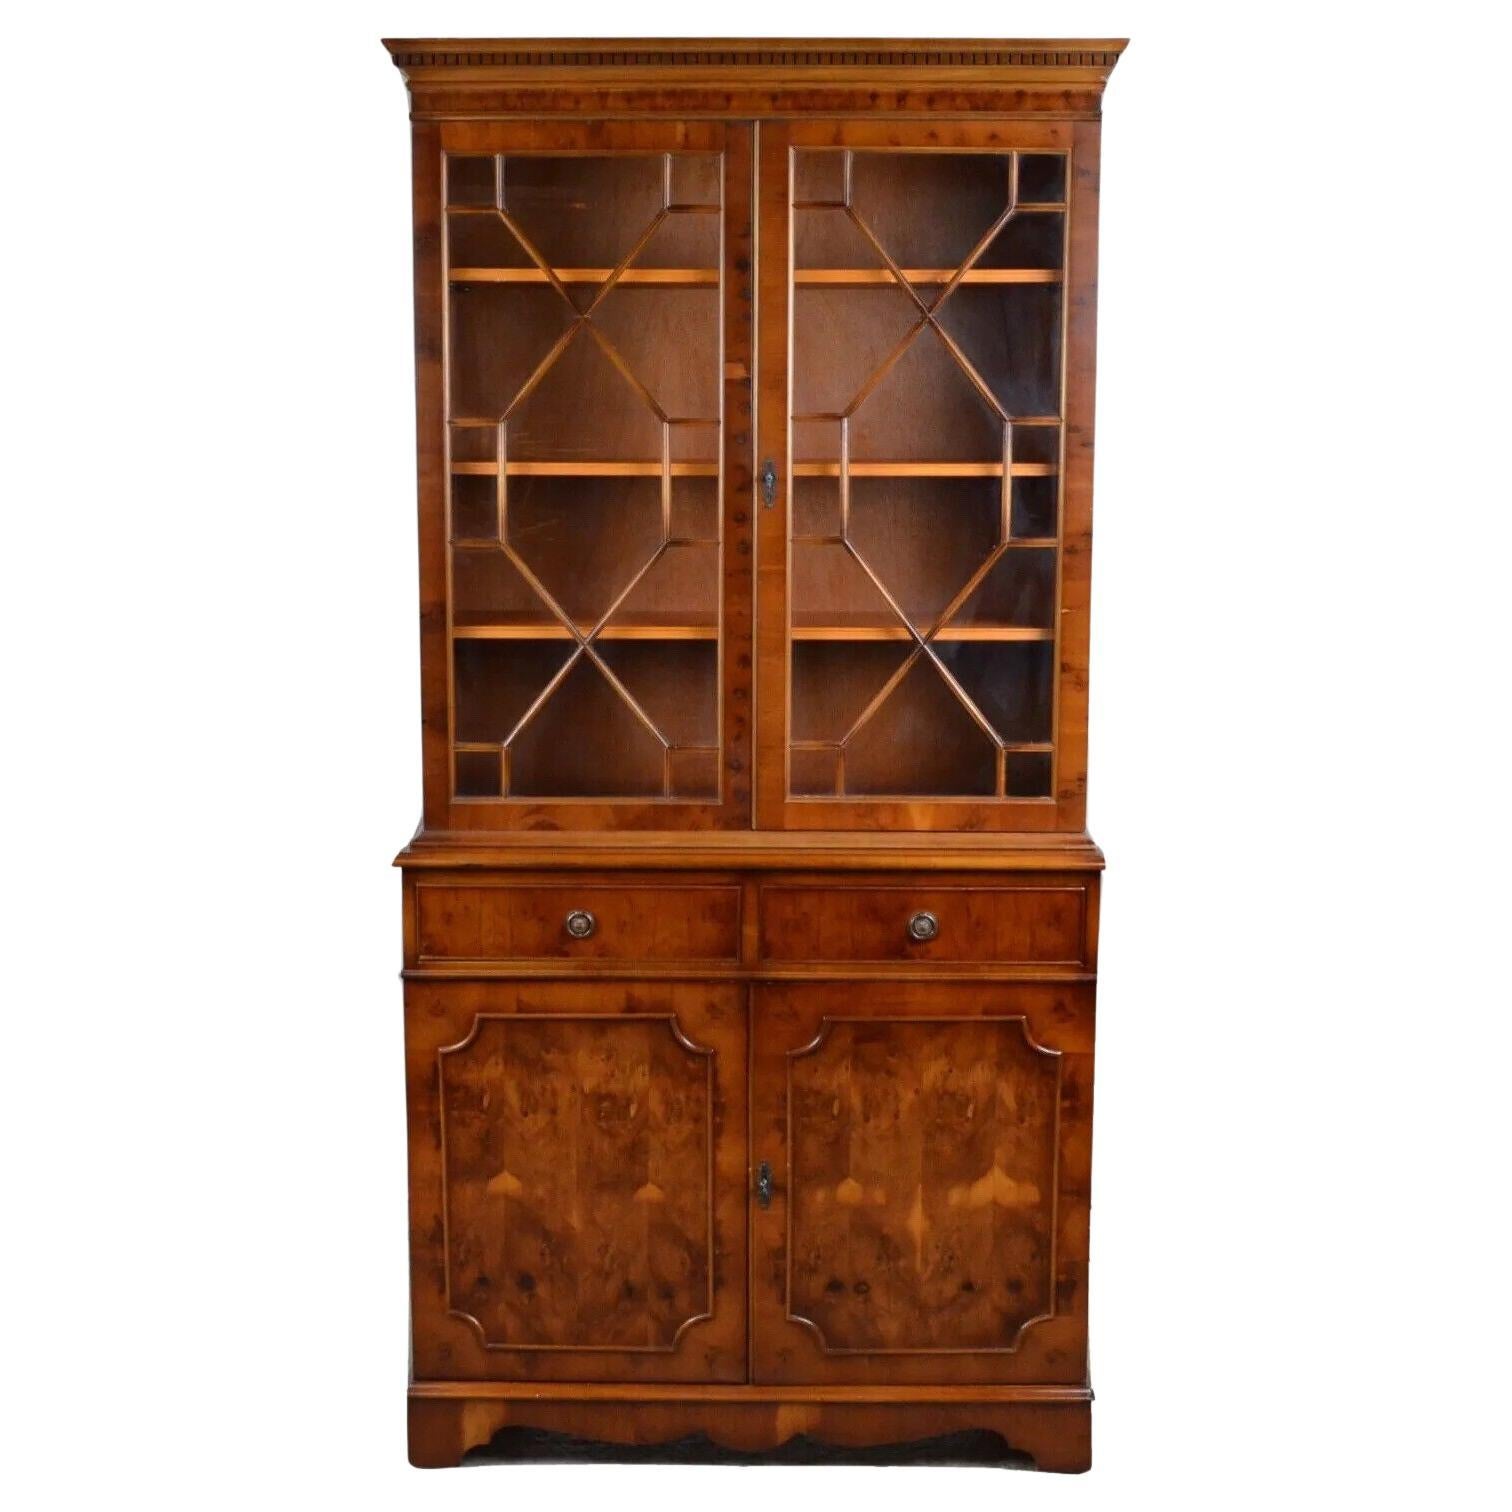 Bevan Funnell Astral Glazed Hardwood Library Display Bookcase Regency Style For Sale